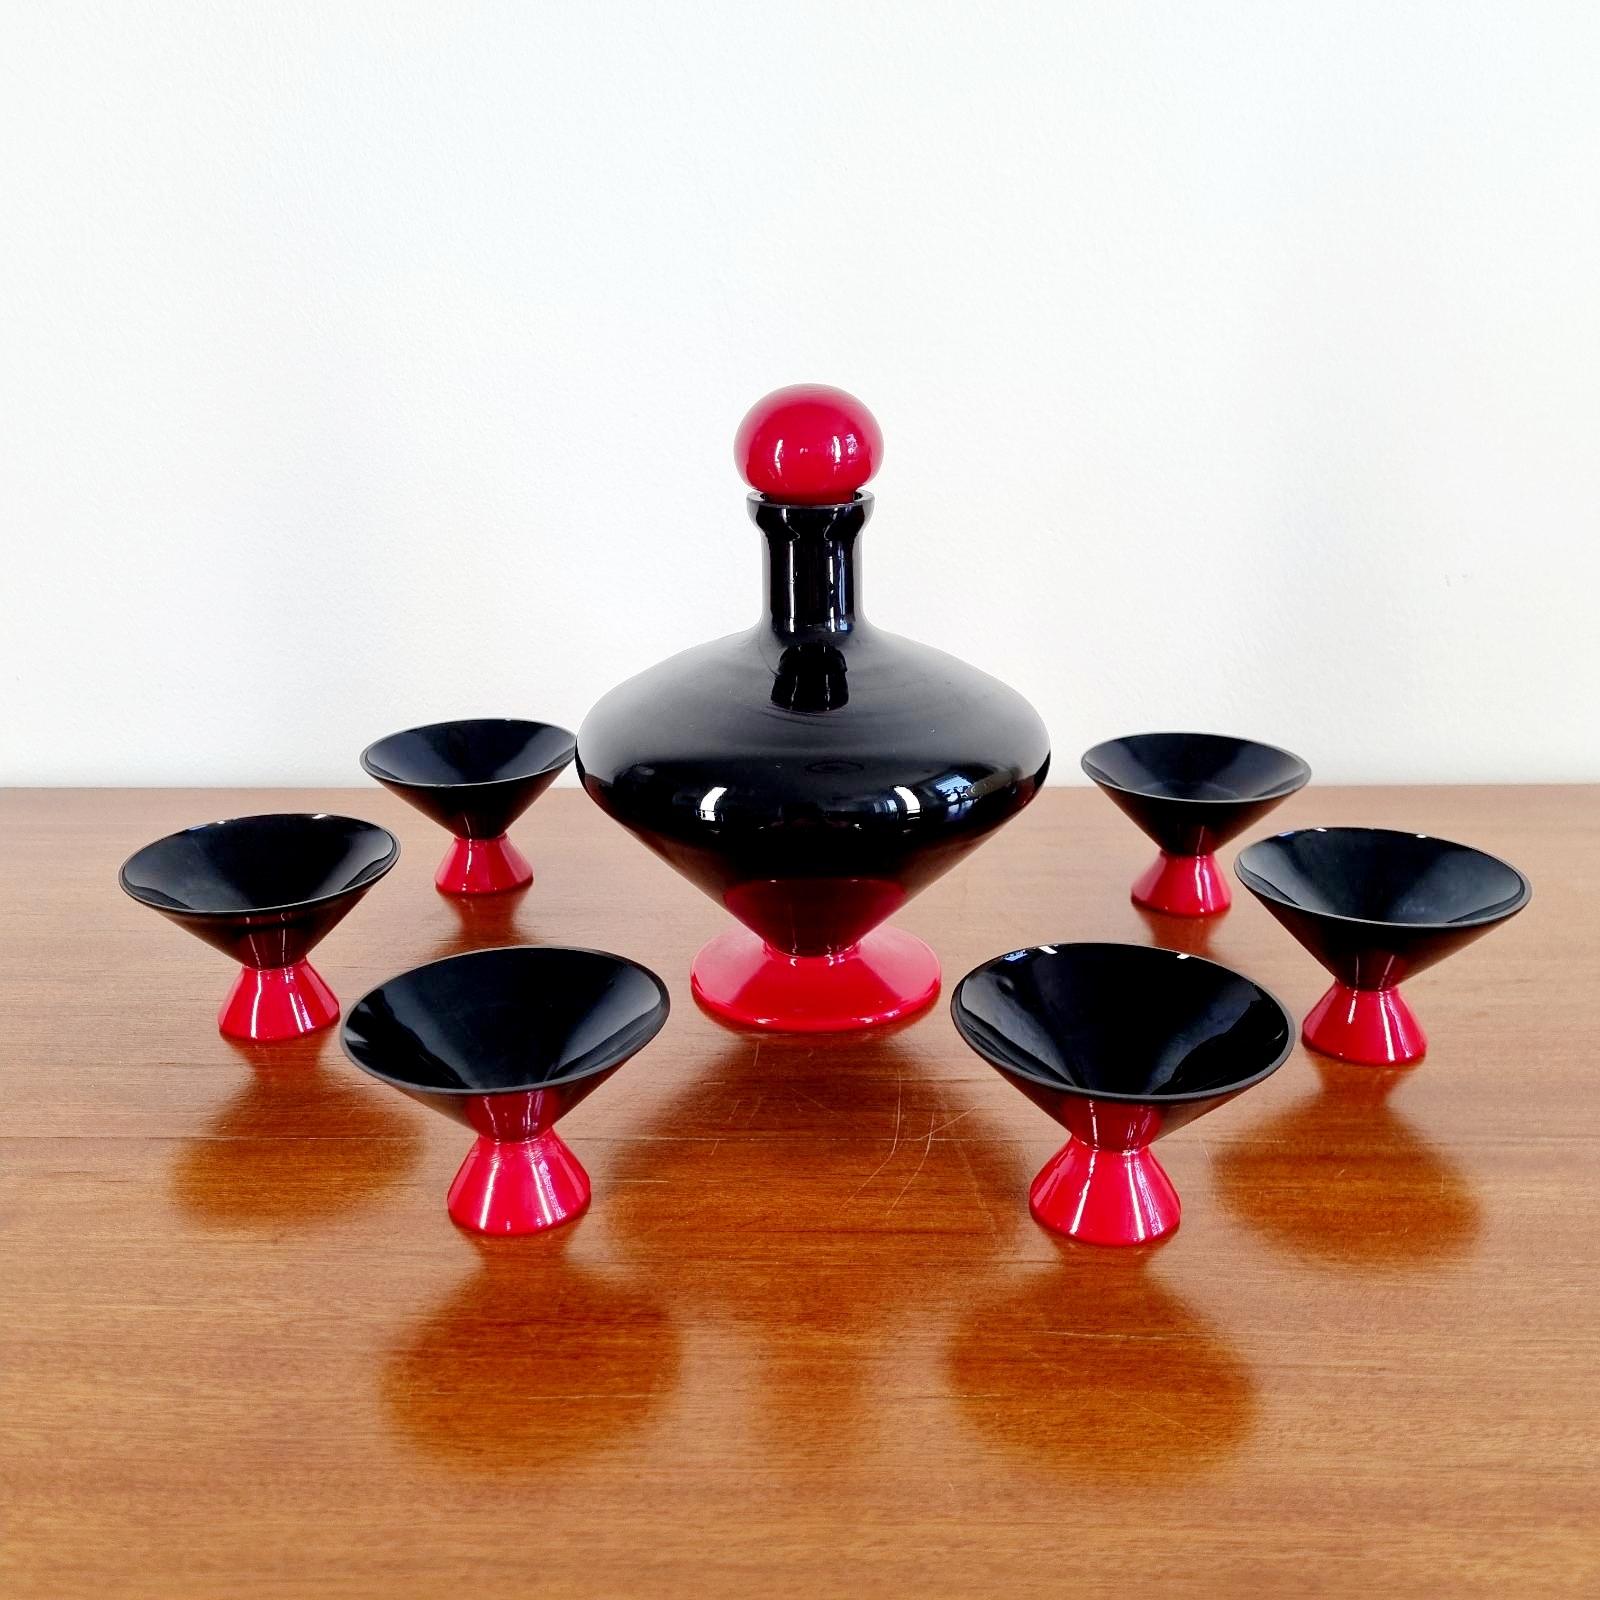 Rare Murano glass liquore set in red and black color. Designed by Napoleone Martinuzzi for Venini in the 30s.

In good vintage condition with minor signe of use and age.

Dimentions:

Bottle:
Height 17 cm
Diameter 13 cm

Glass:
Height 5 cm
Diameter